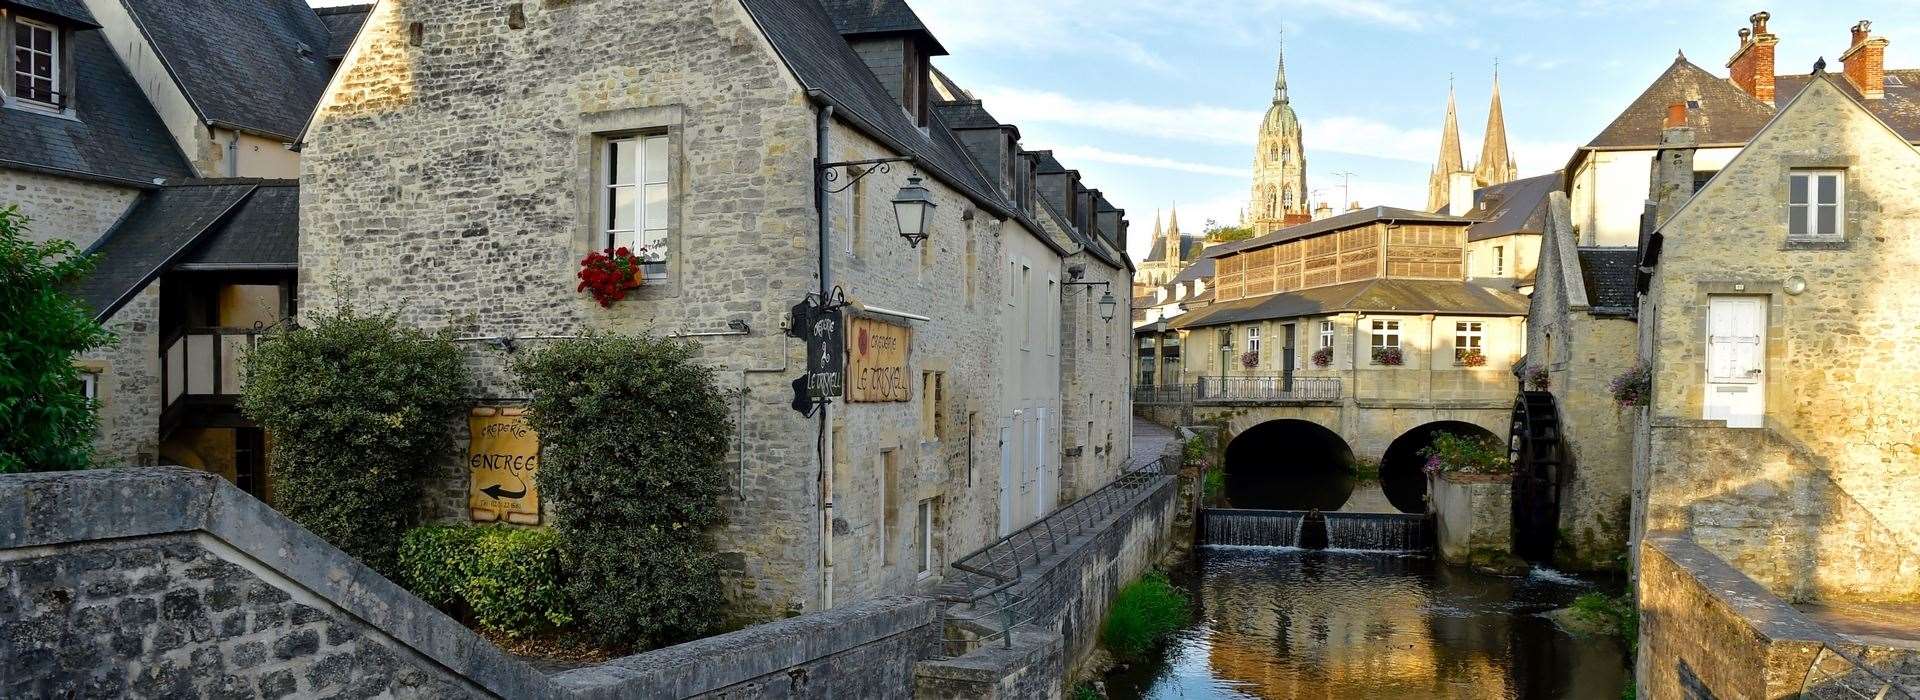 Bayeux is renowned for its stunning historic centre as well as the UNESCO-listed tapestry depicting the Norman conquest of England in 1066.